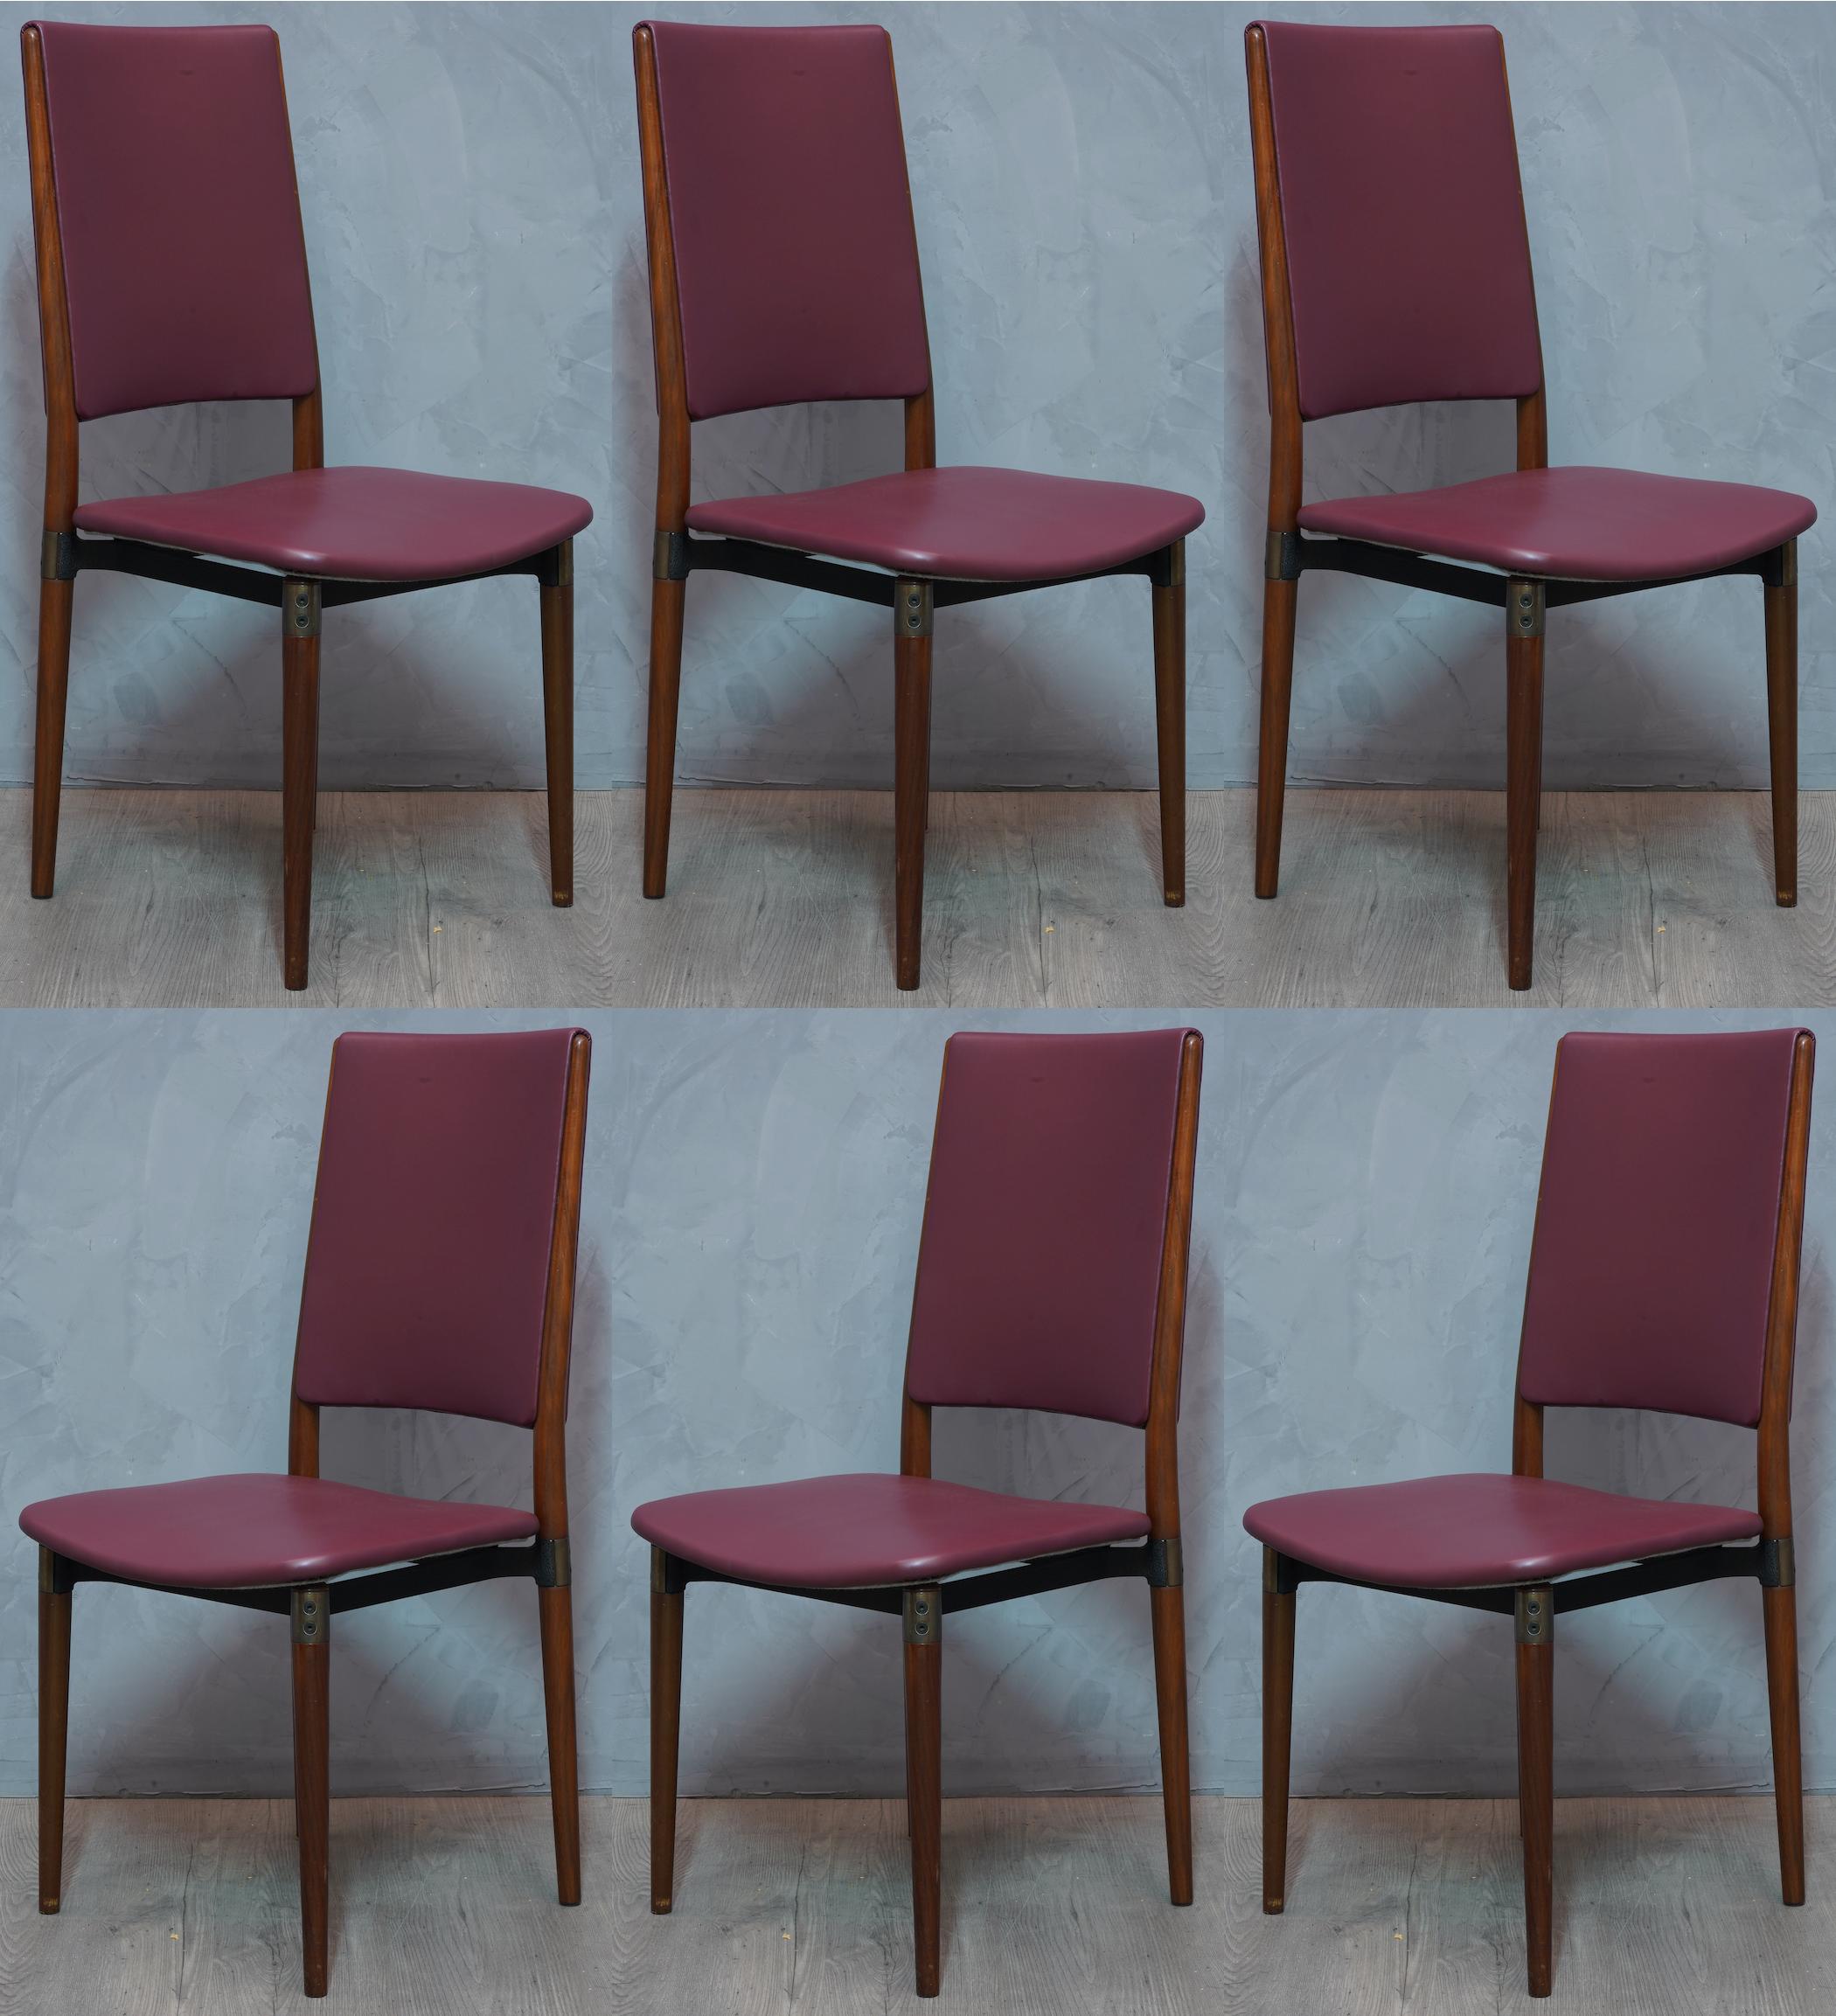 Simple structure but much elegance to this set of 6 chairs of Italian design of the 1950s.

Six Osvaldo Borsani punched Chairs from 1960. All covered in red leather ( the leather is original of the years), with wooden legs, and metal frame. Founder